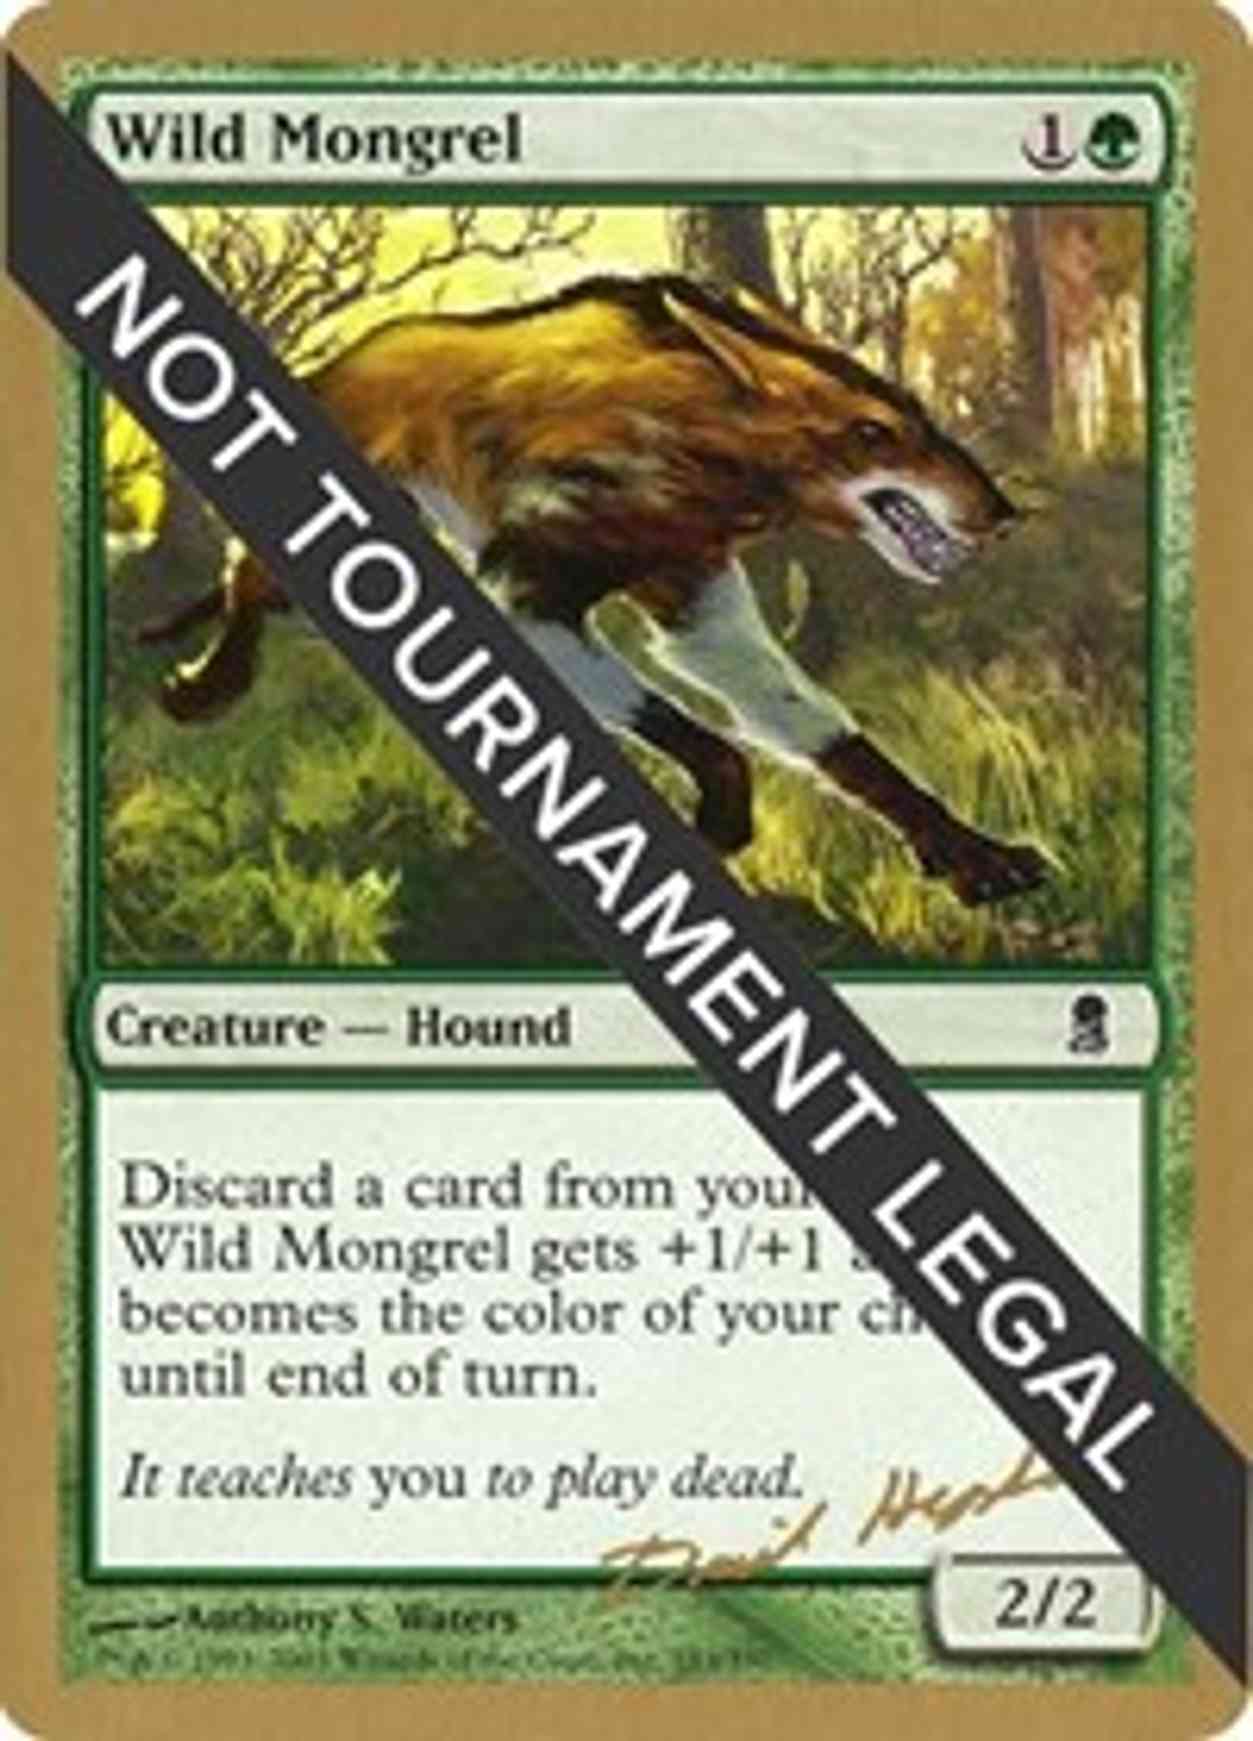 Wild Mongrel - 2003 Dave Humpherys (ODY) magic card front